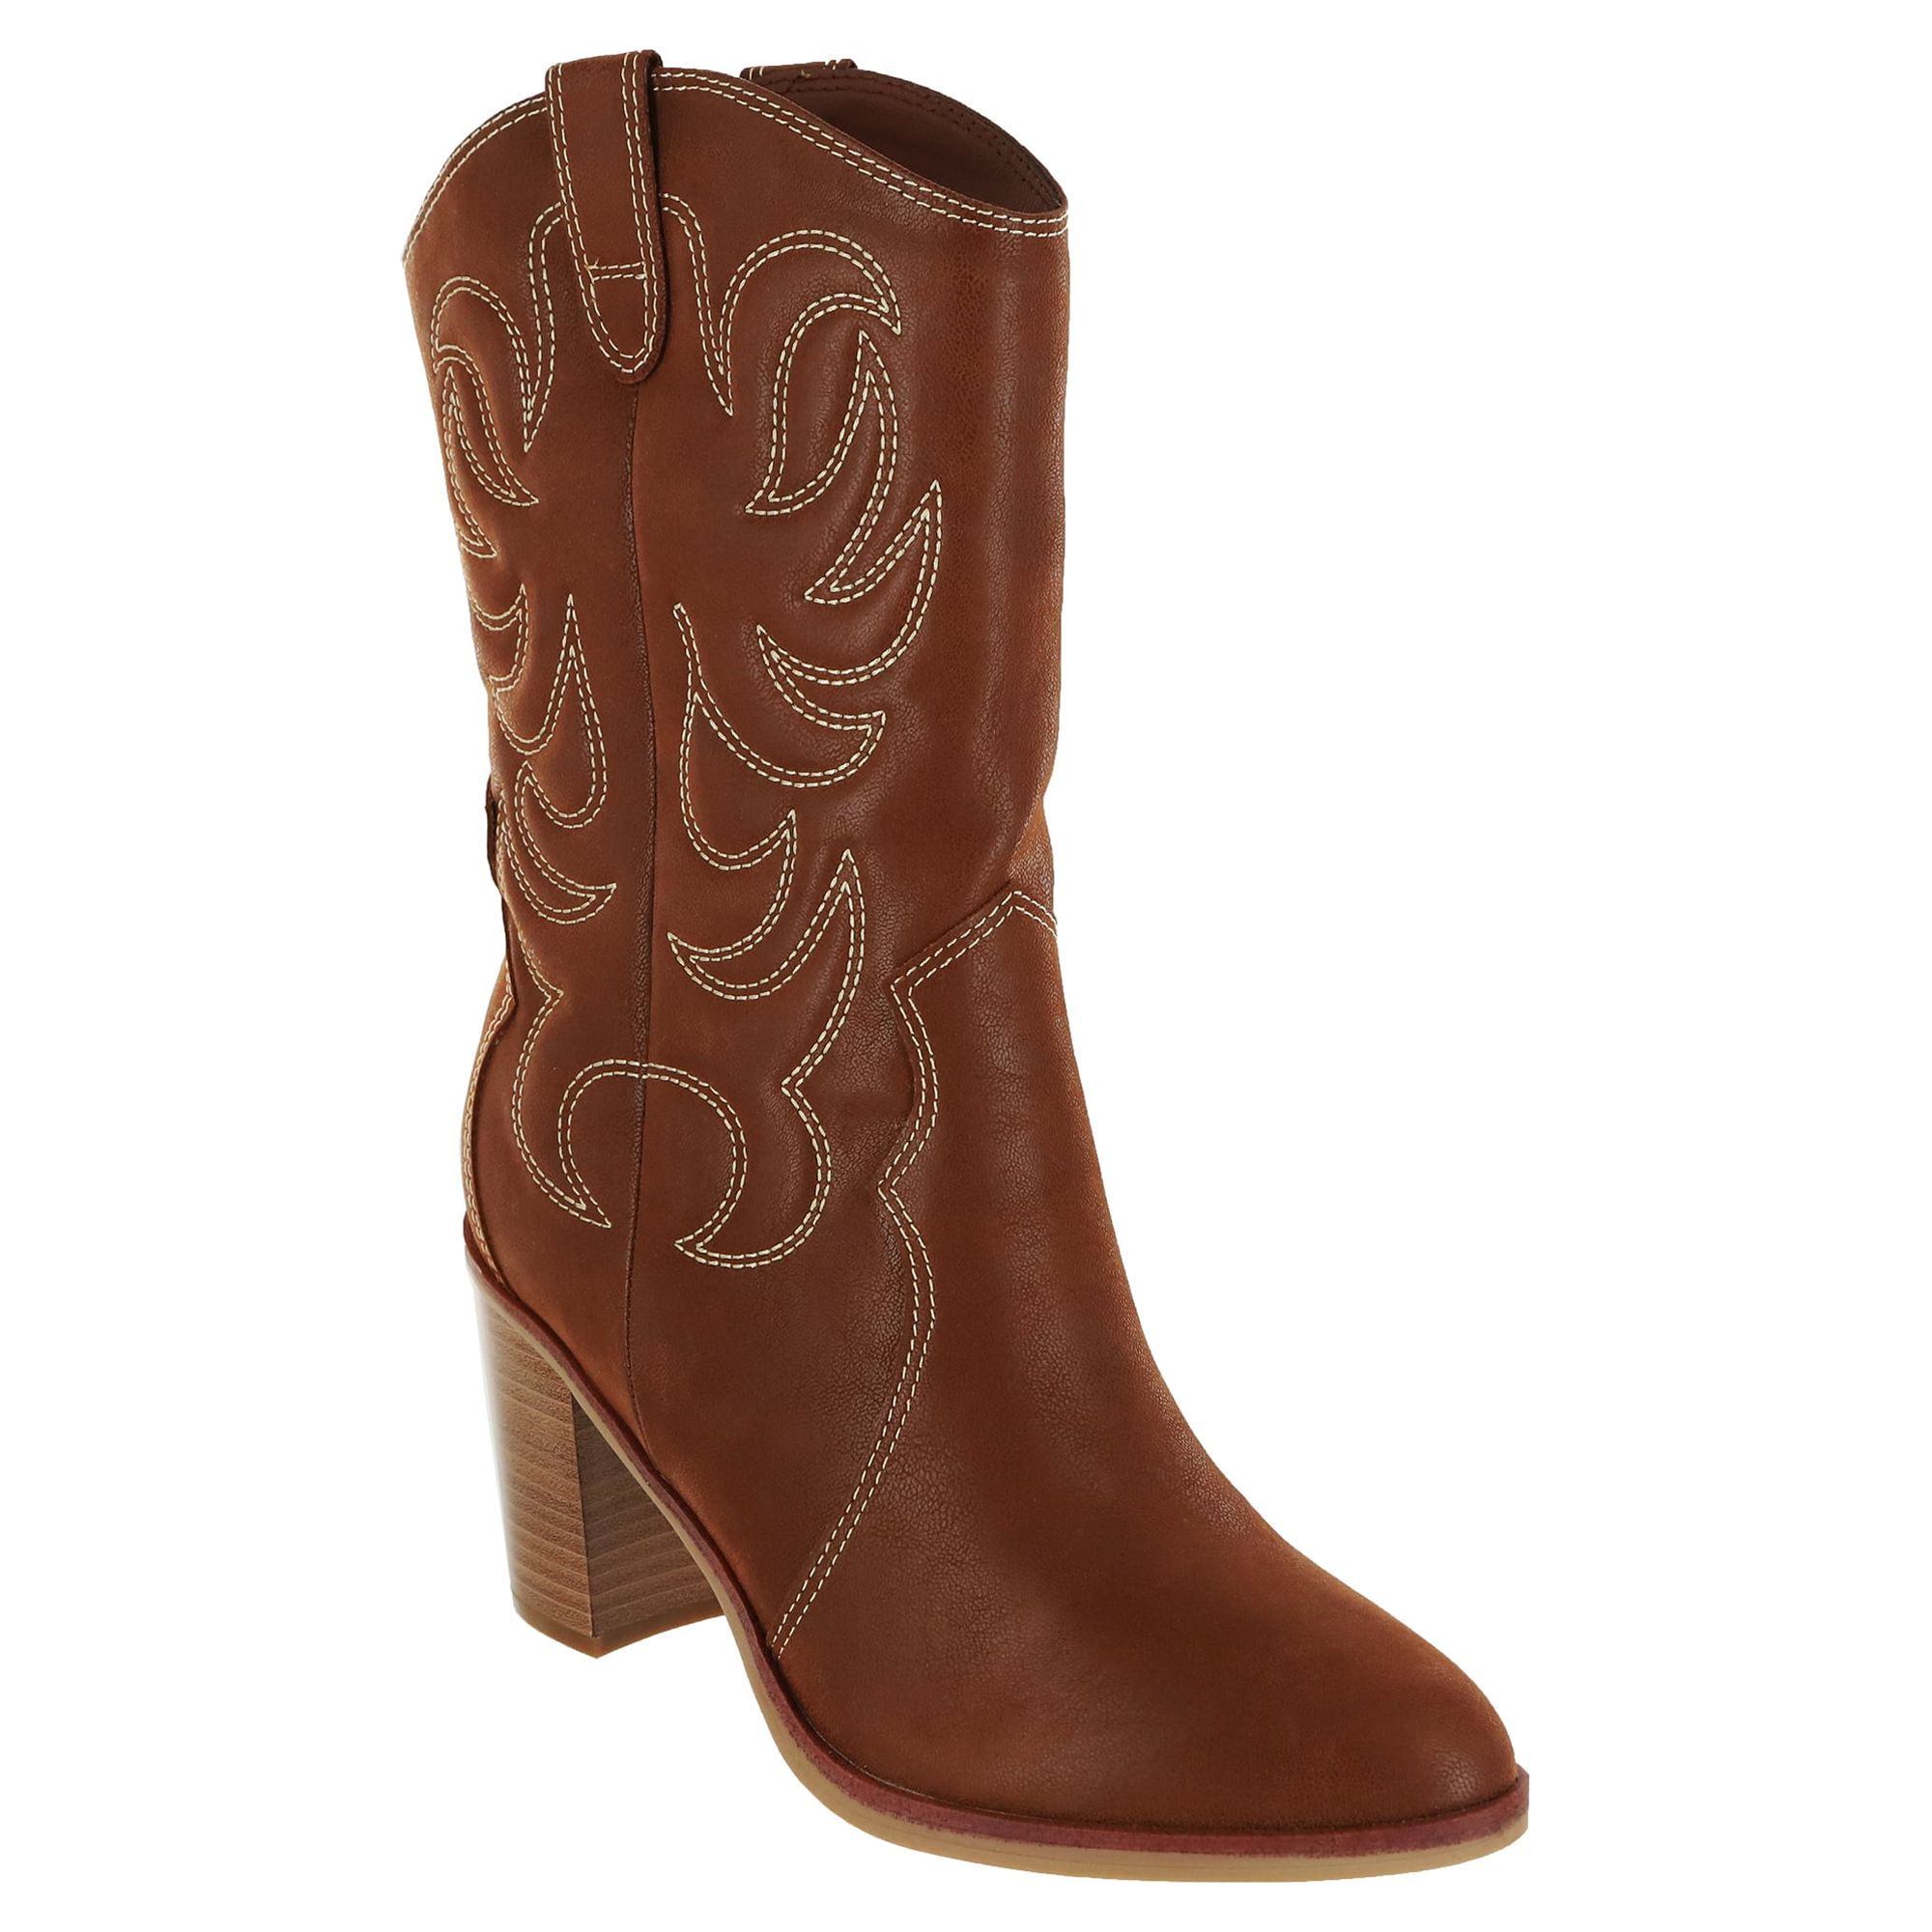 The Pioneer Woman Embroidered Mid-Calf Western Boots, Women's - image 6 of 6